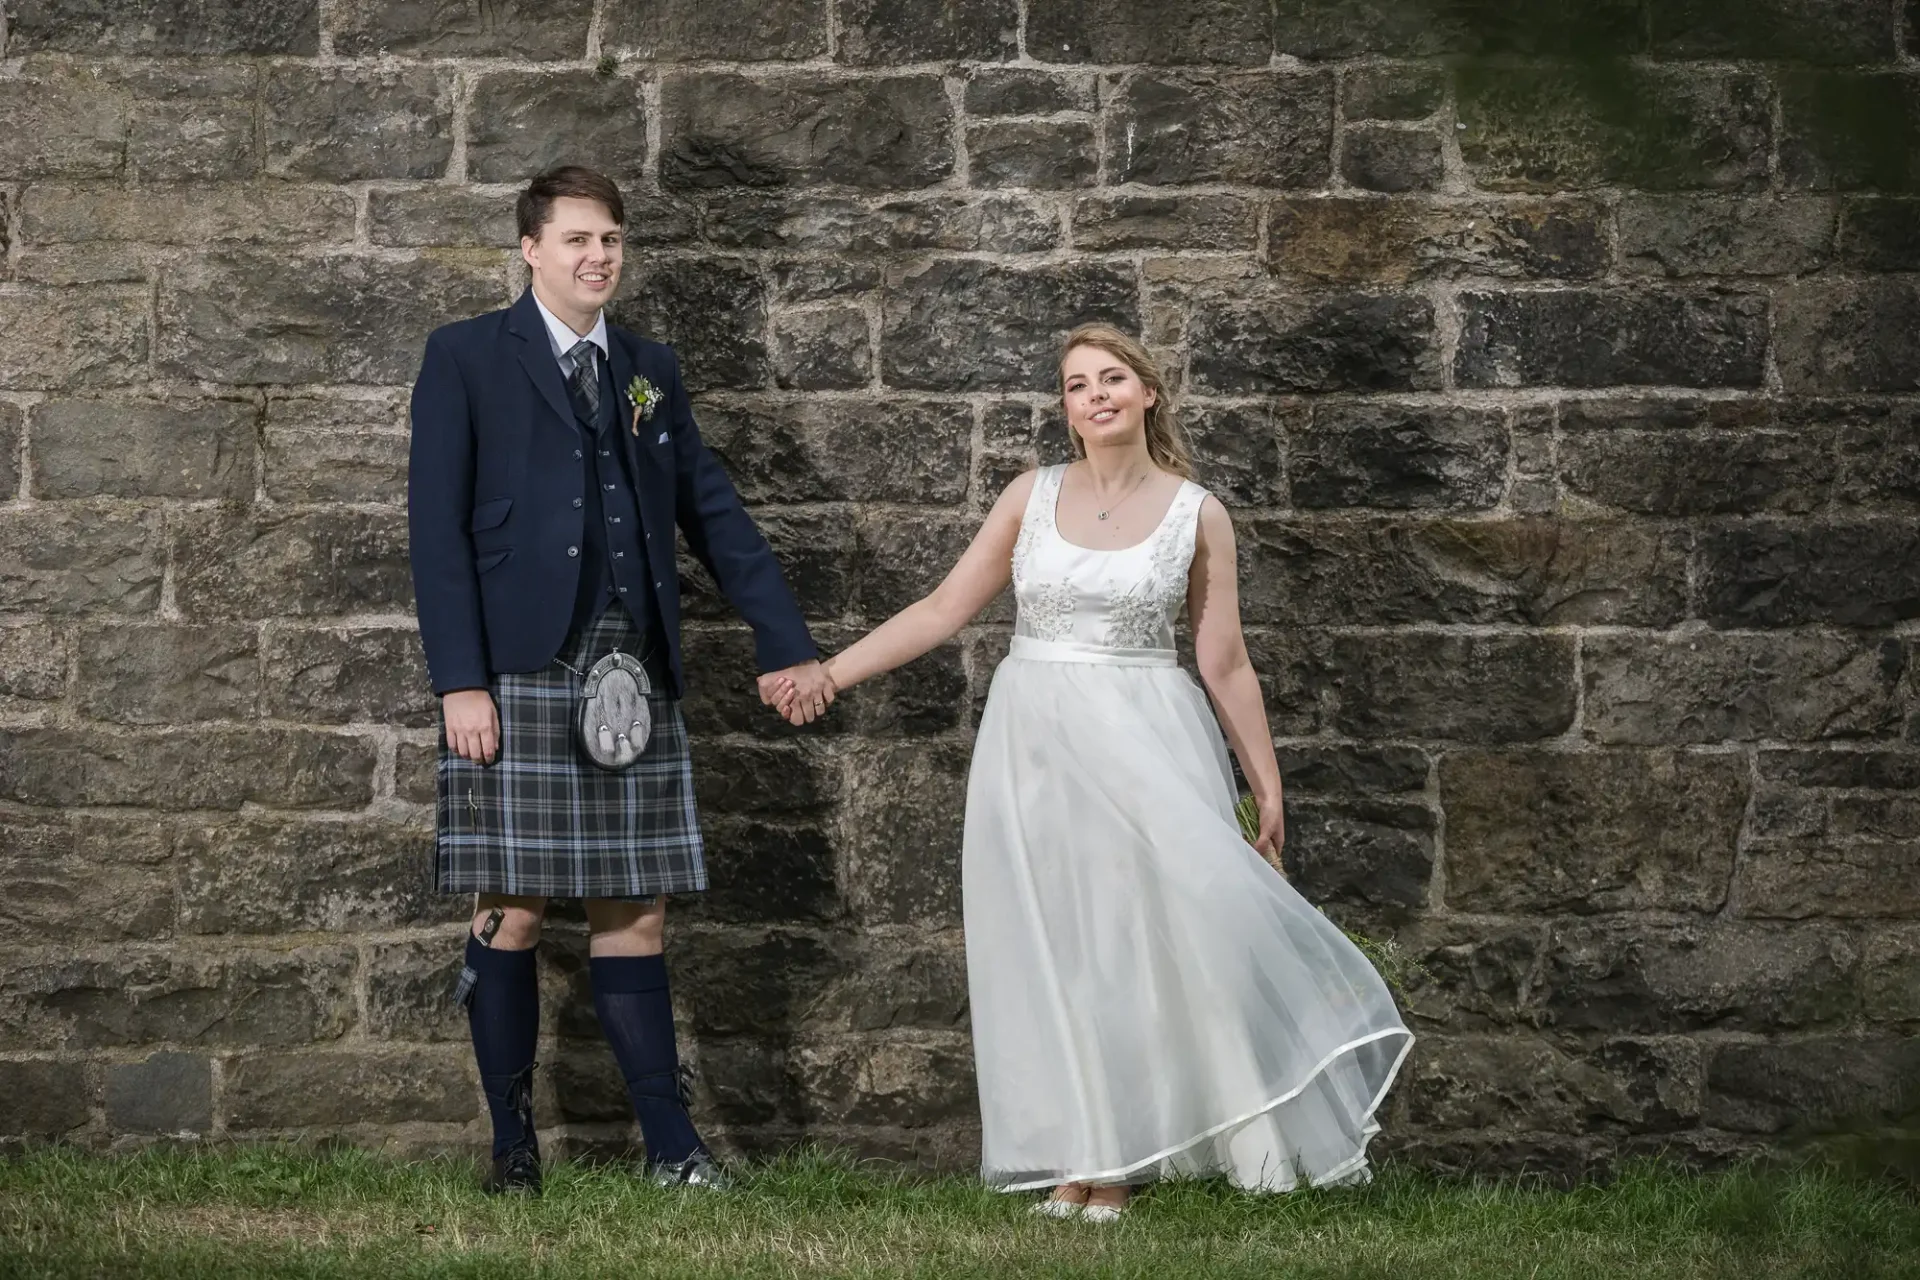 A bride in a white dress and a groom in a kilt holding hands in front of a stone wall, smiling contentedly.